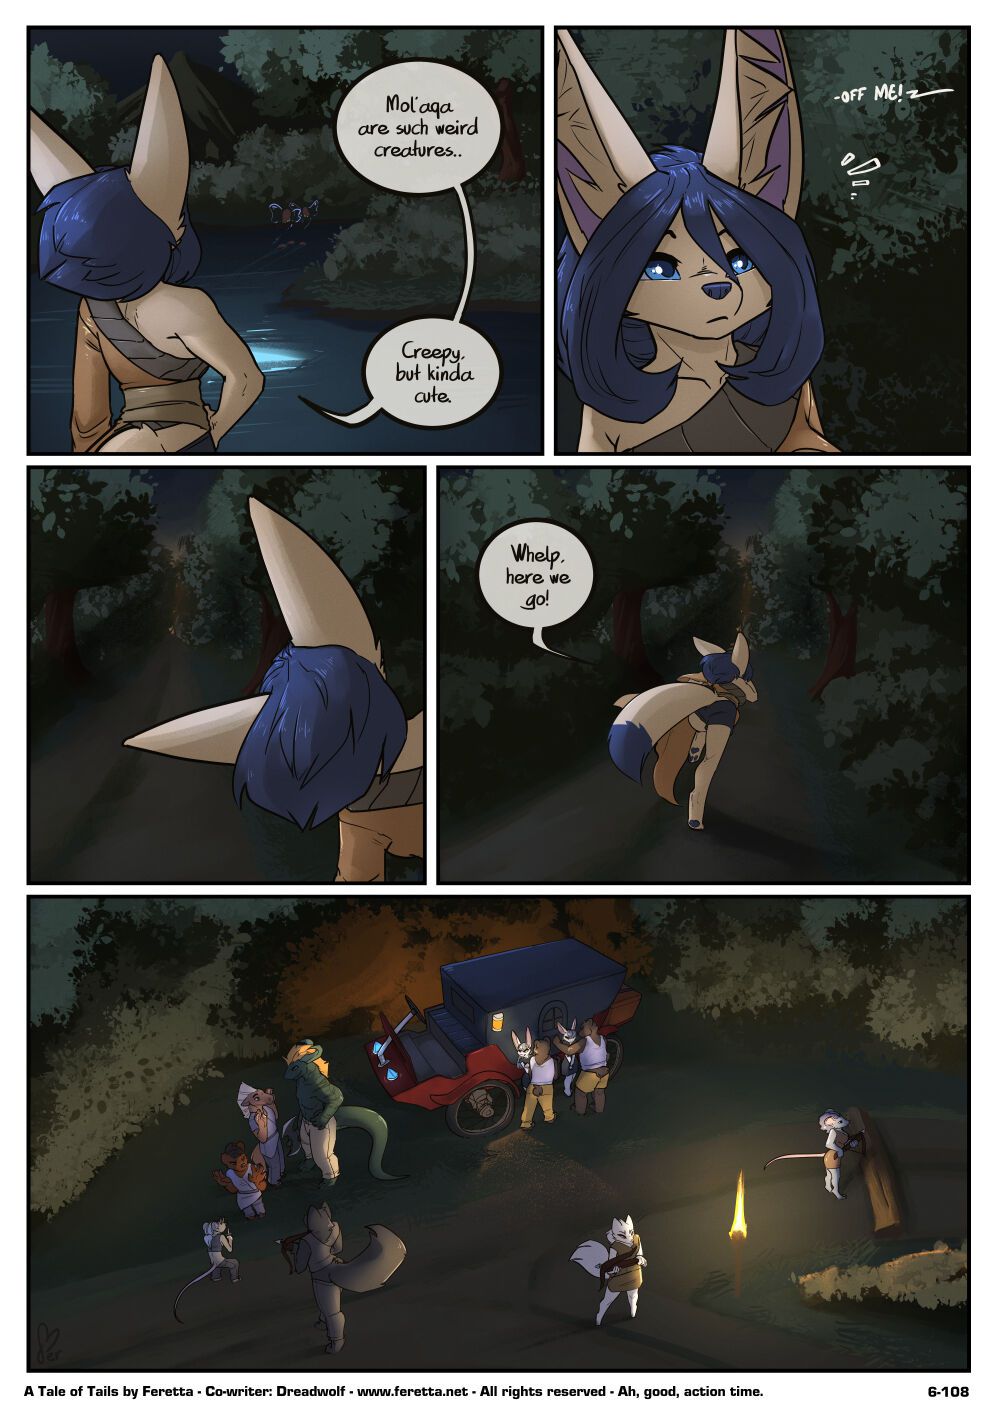 [Feretta] A Tale of Tails: Chapter 6 - Paths converge (ongoing) 111